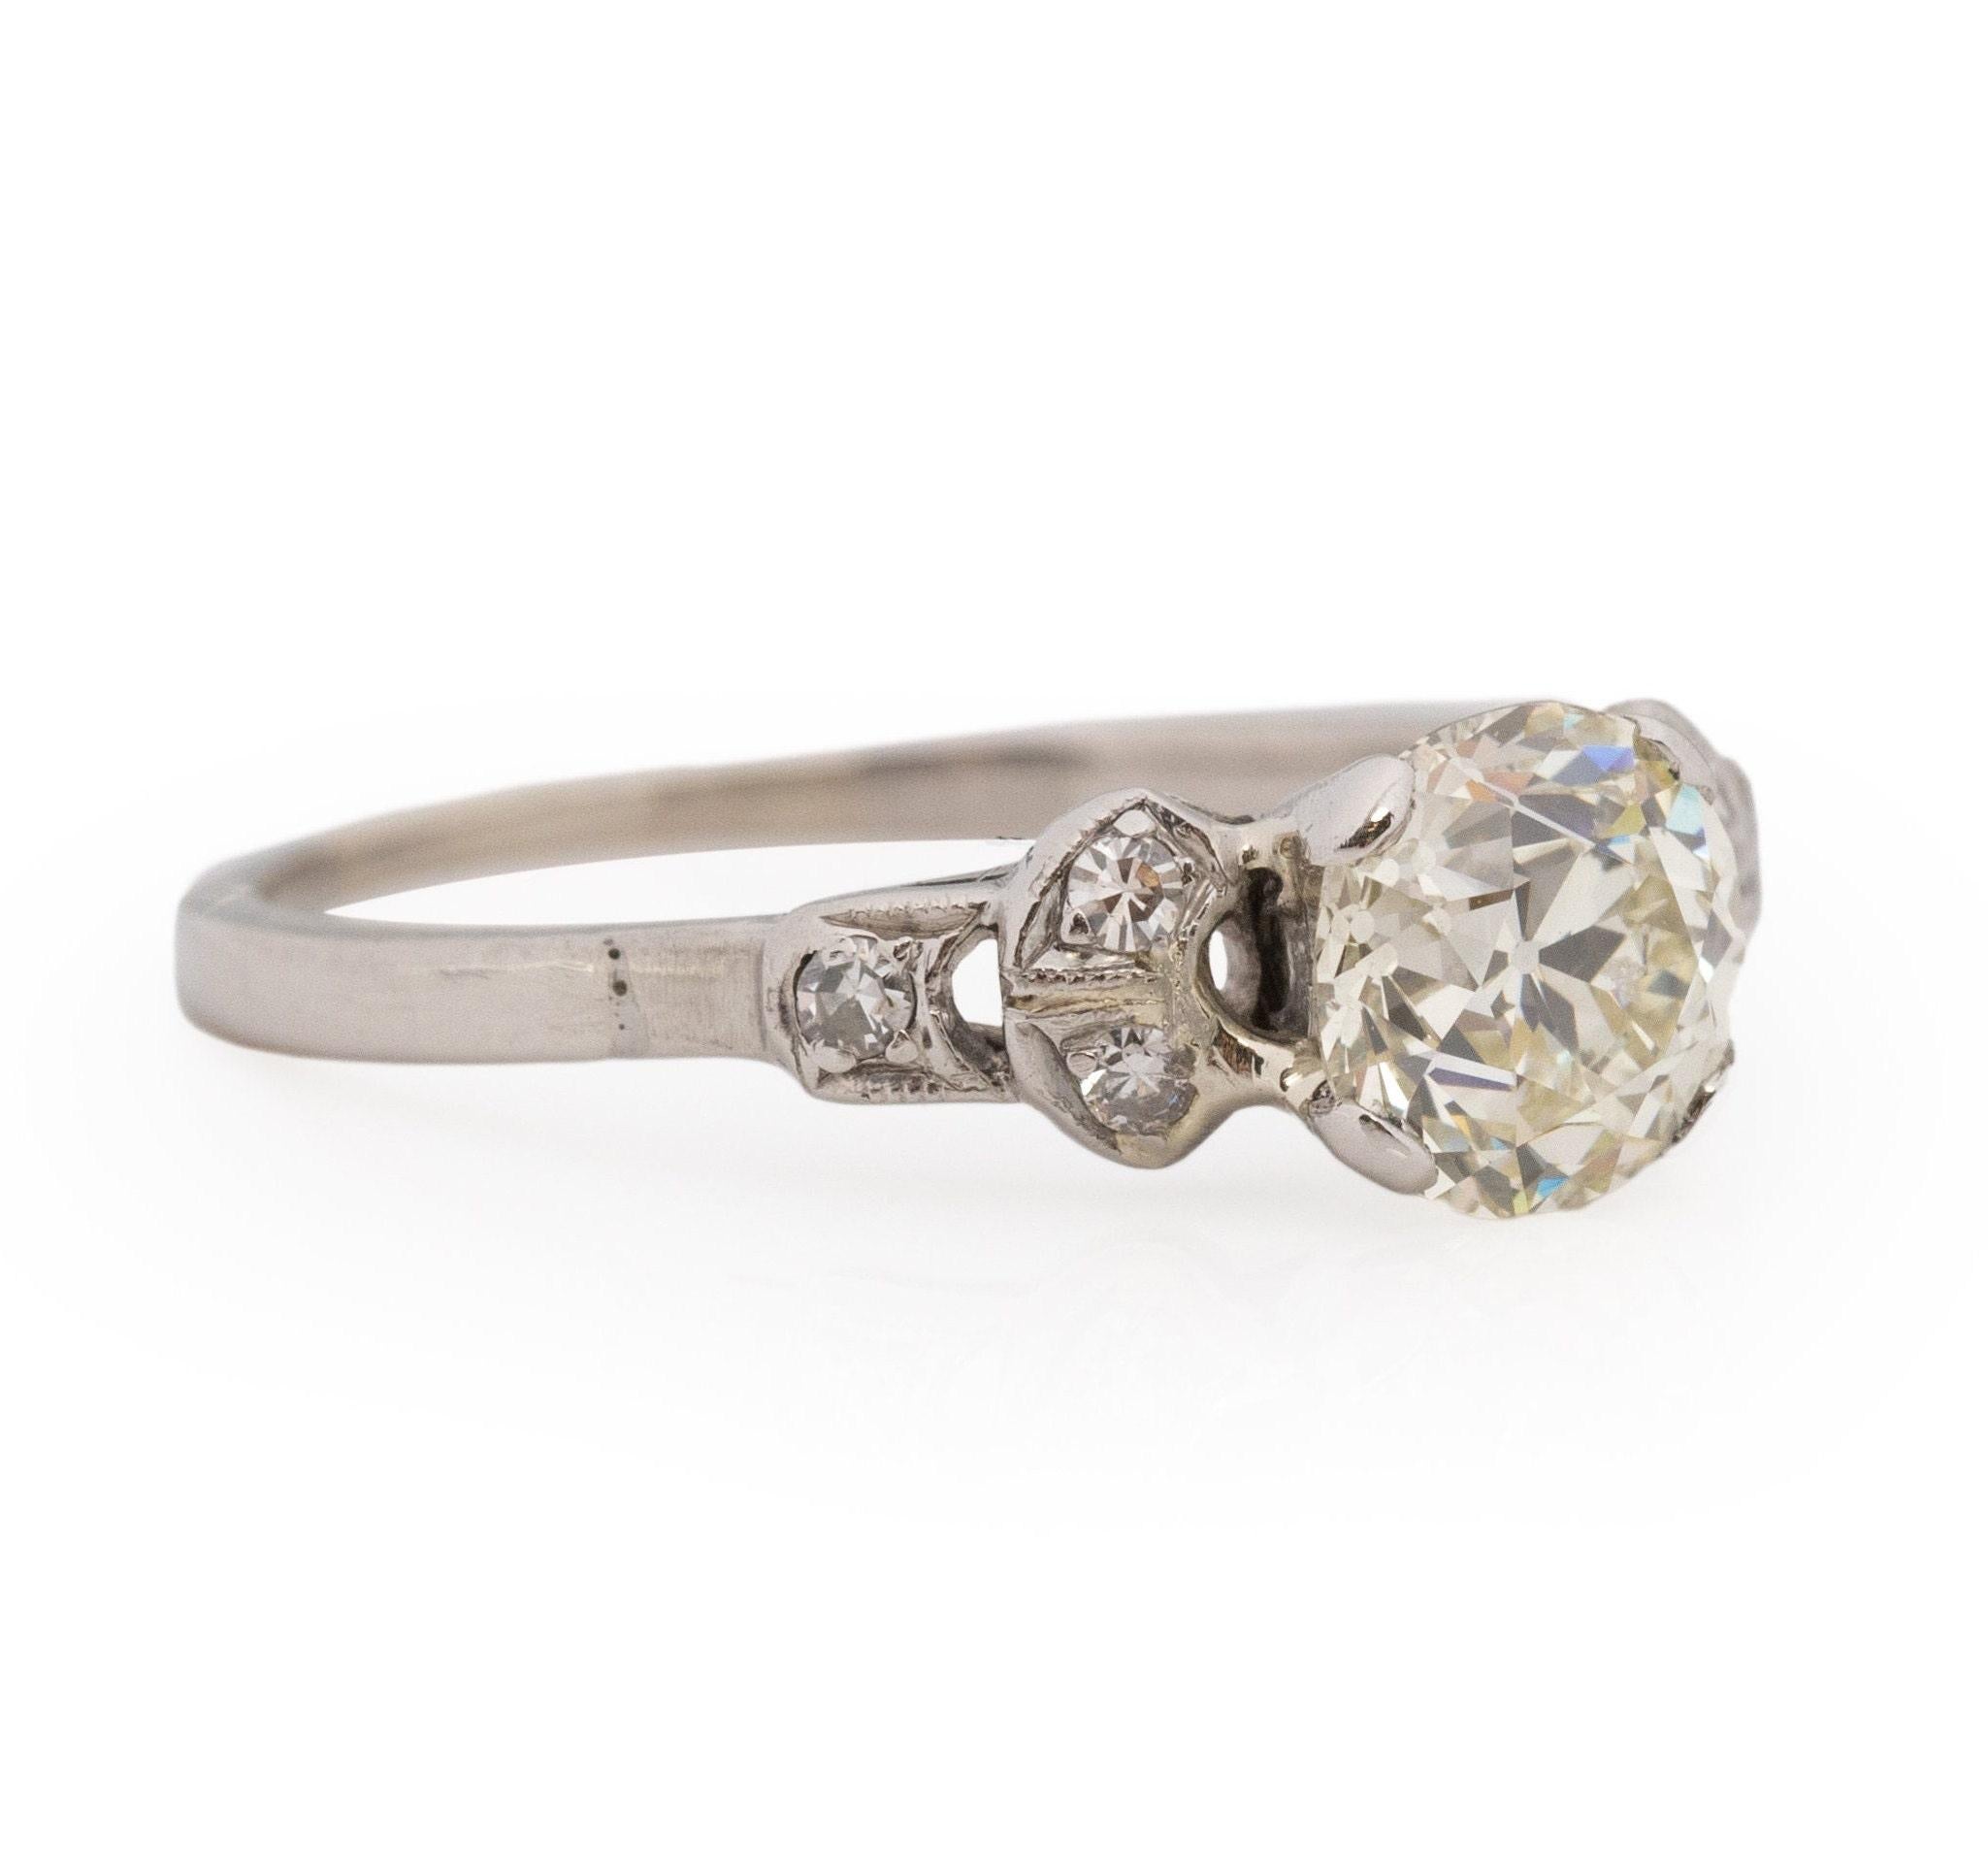 Circa 1920's Art Deco 1.15Ct Old European Cut GIA Certified Vintage Solitaire In Good Condition For Sale In Addison, TX